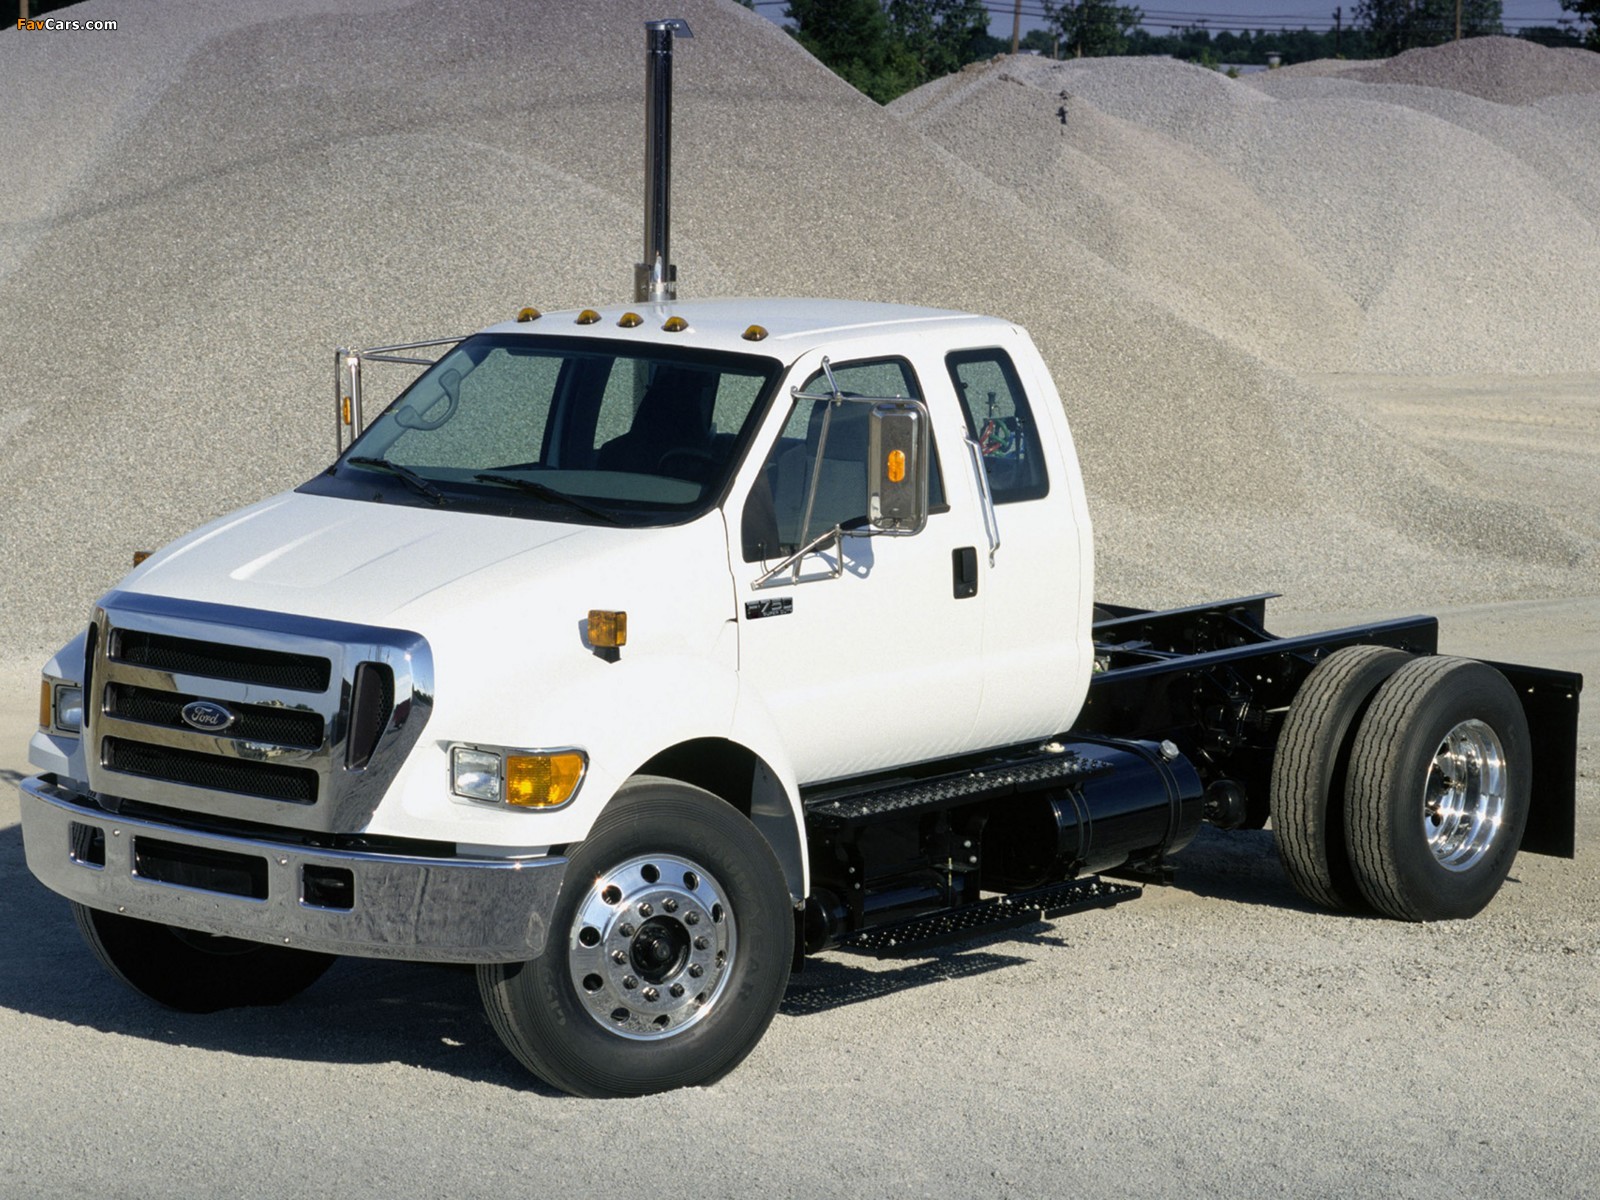 Ford F-750 Super Duty Extended Cab 2007 photos (1600 x 1200)